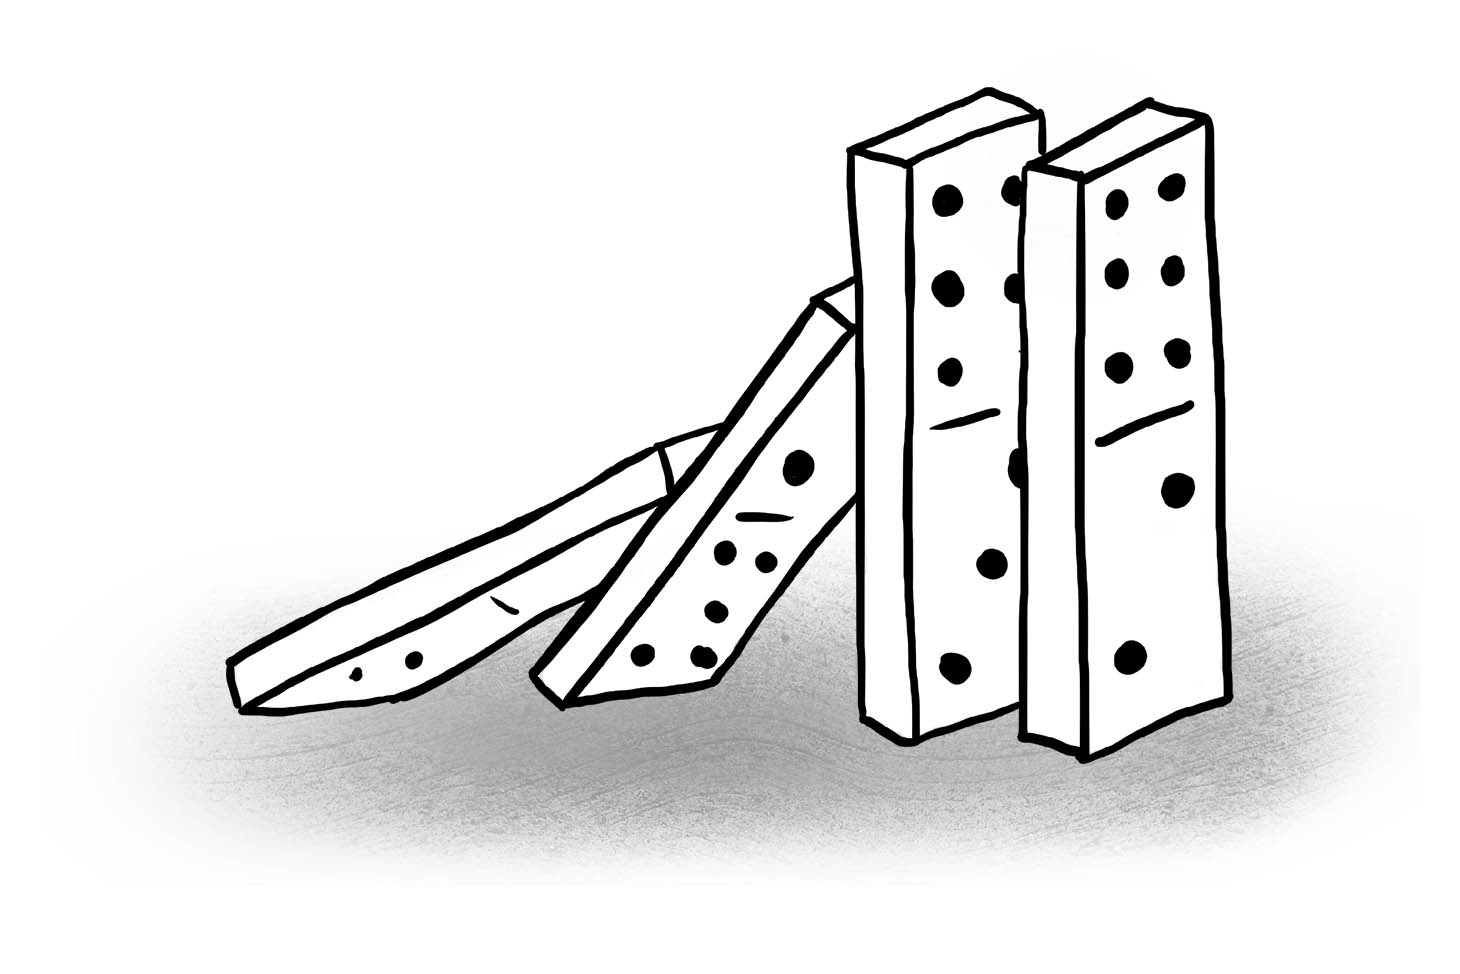 Dominoes fall against each other